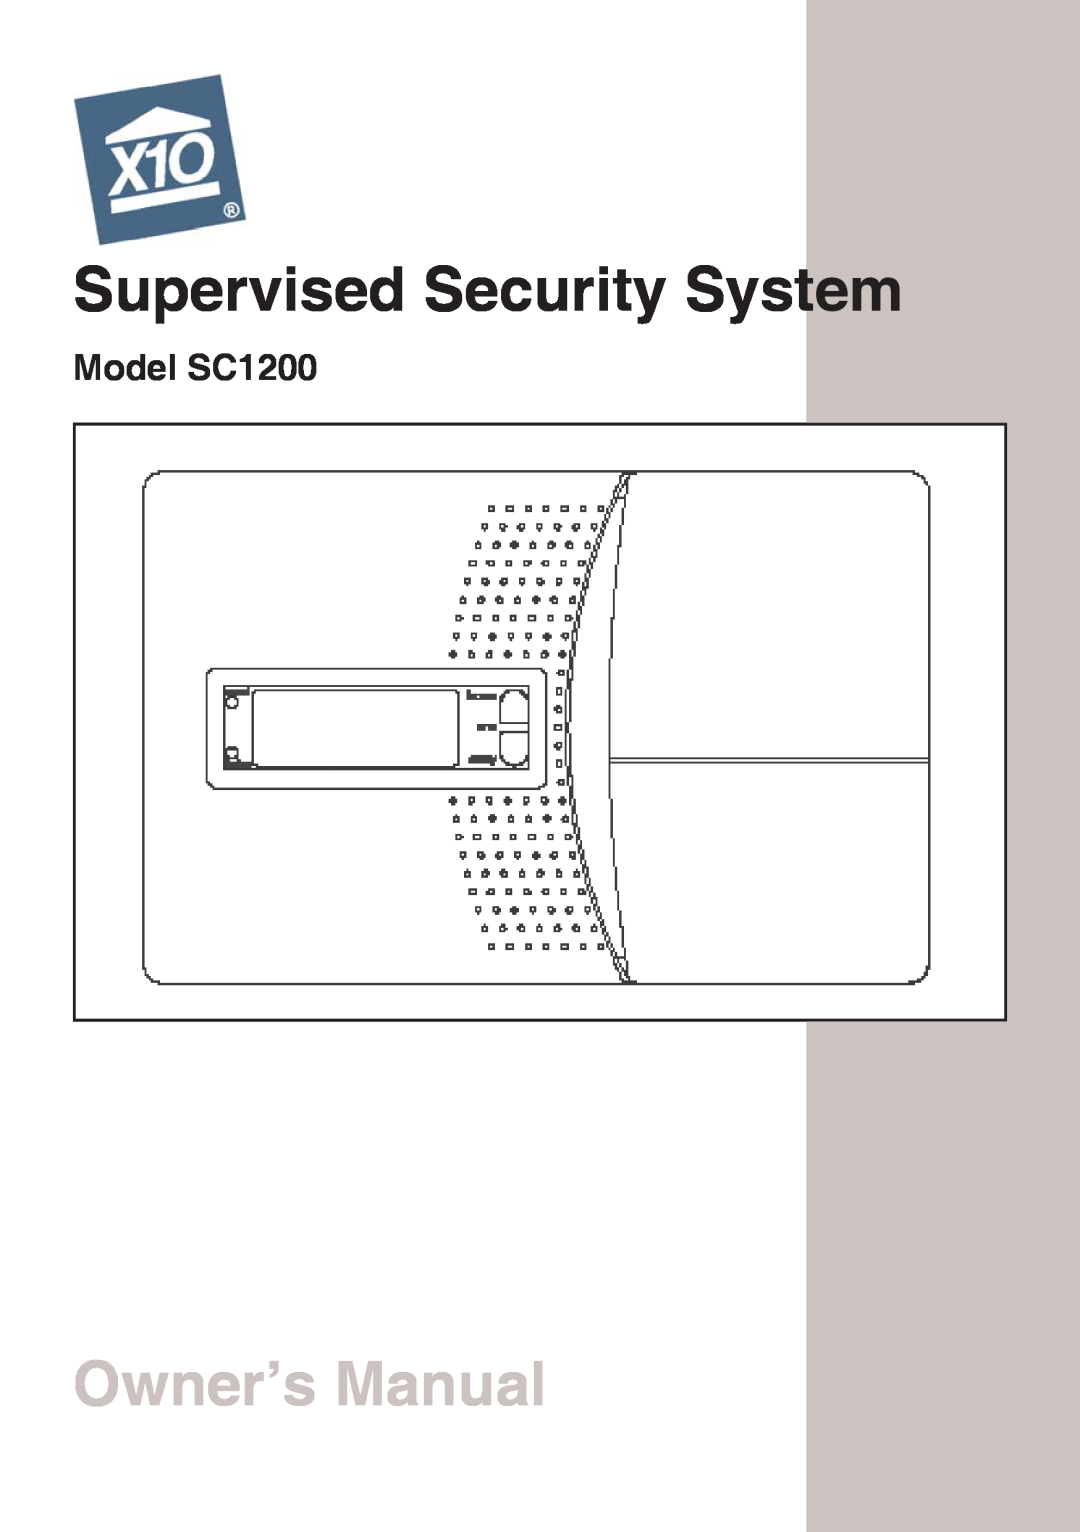 X10 Wireless Technology owner manual Model SC1200, Supervised Security System 